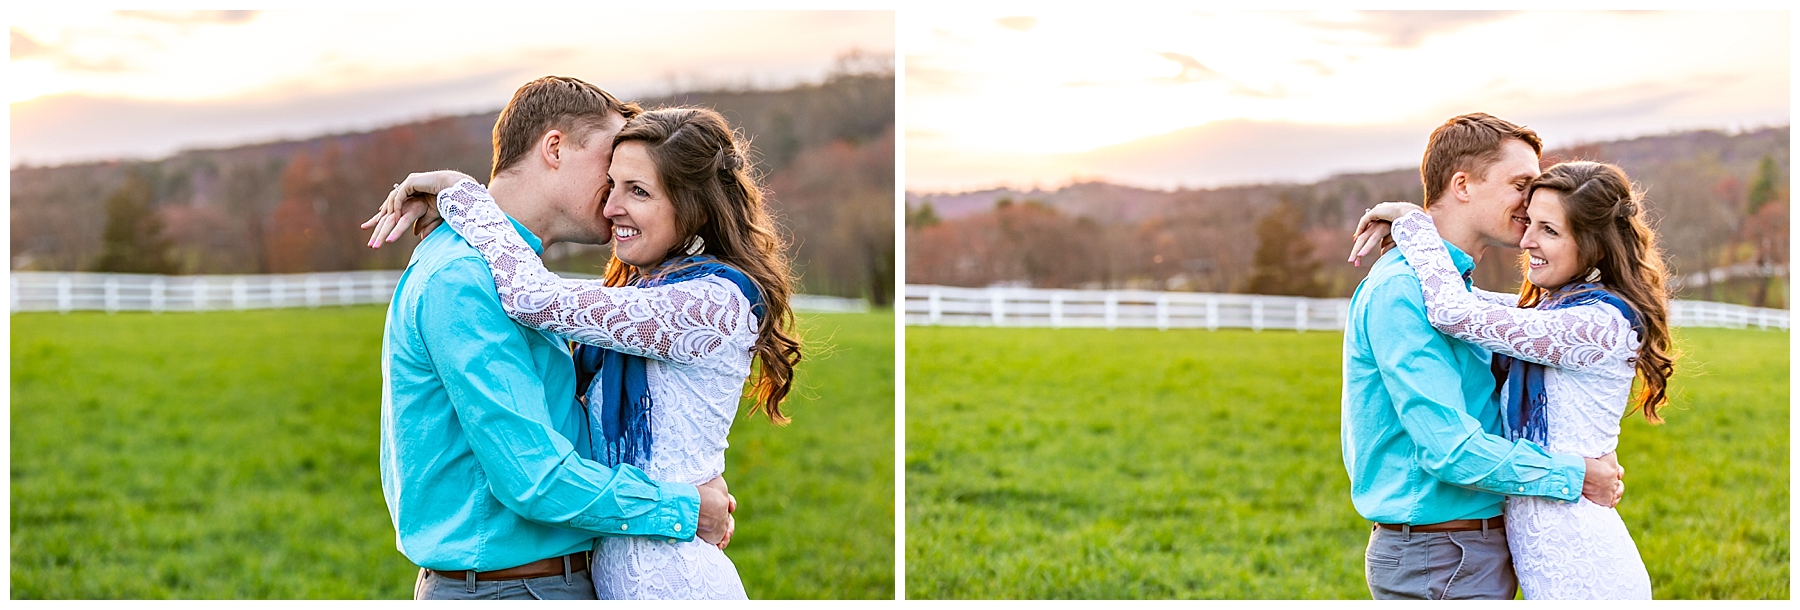 Chelsea Phil Private Estate Engagement Living Radiant Photography photos color_0043.jpg